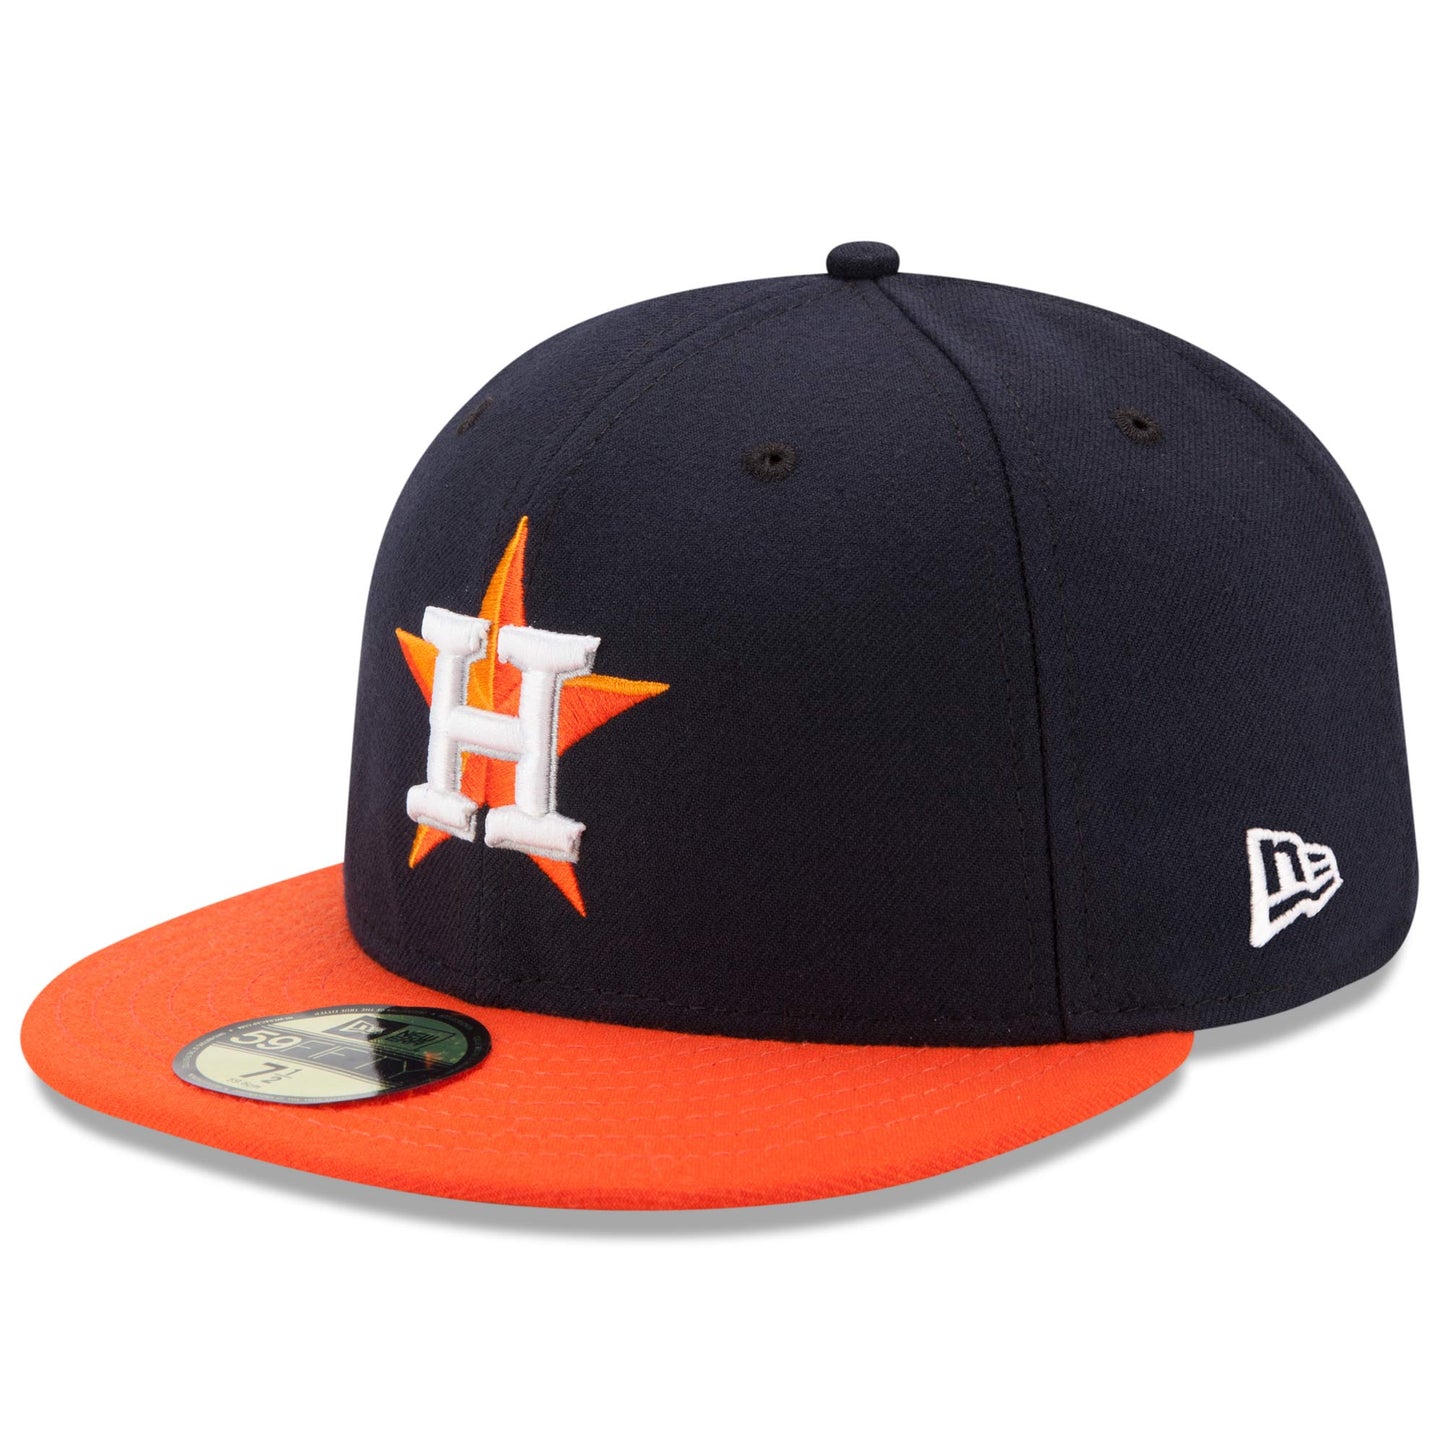 Houston Astros New Era Road Authentic Collection On Field 59FIFTY Performance Fitted Hat - Navy/Orange